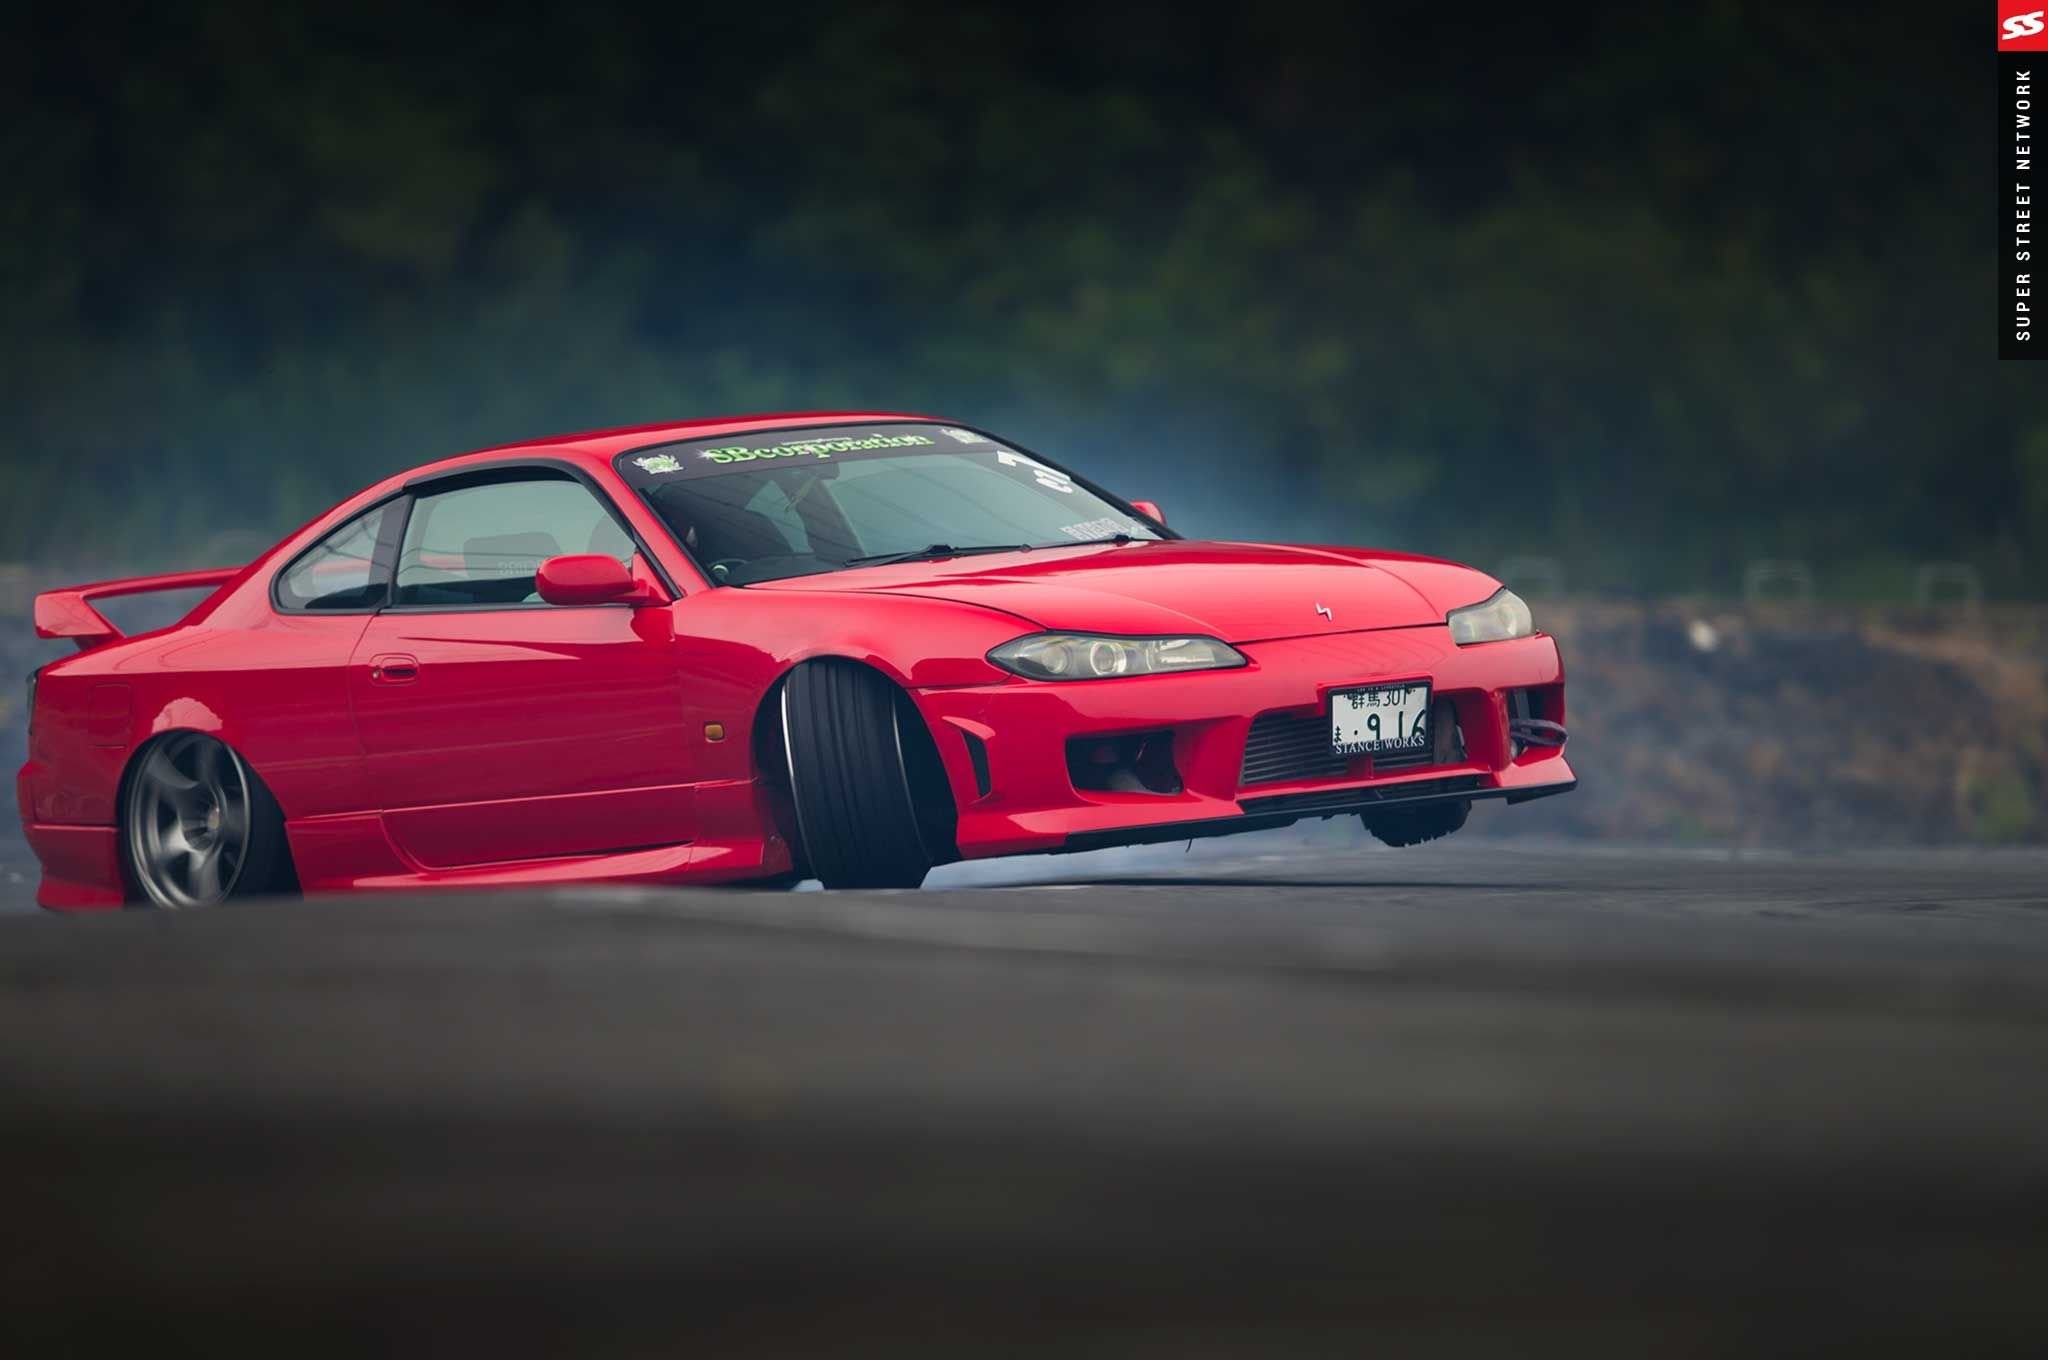 2048x1360 2000 nissan silvia s15 cars red modified wallpaper |  | 907661 |  WallpaperUP